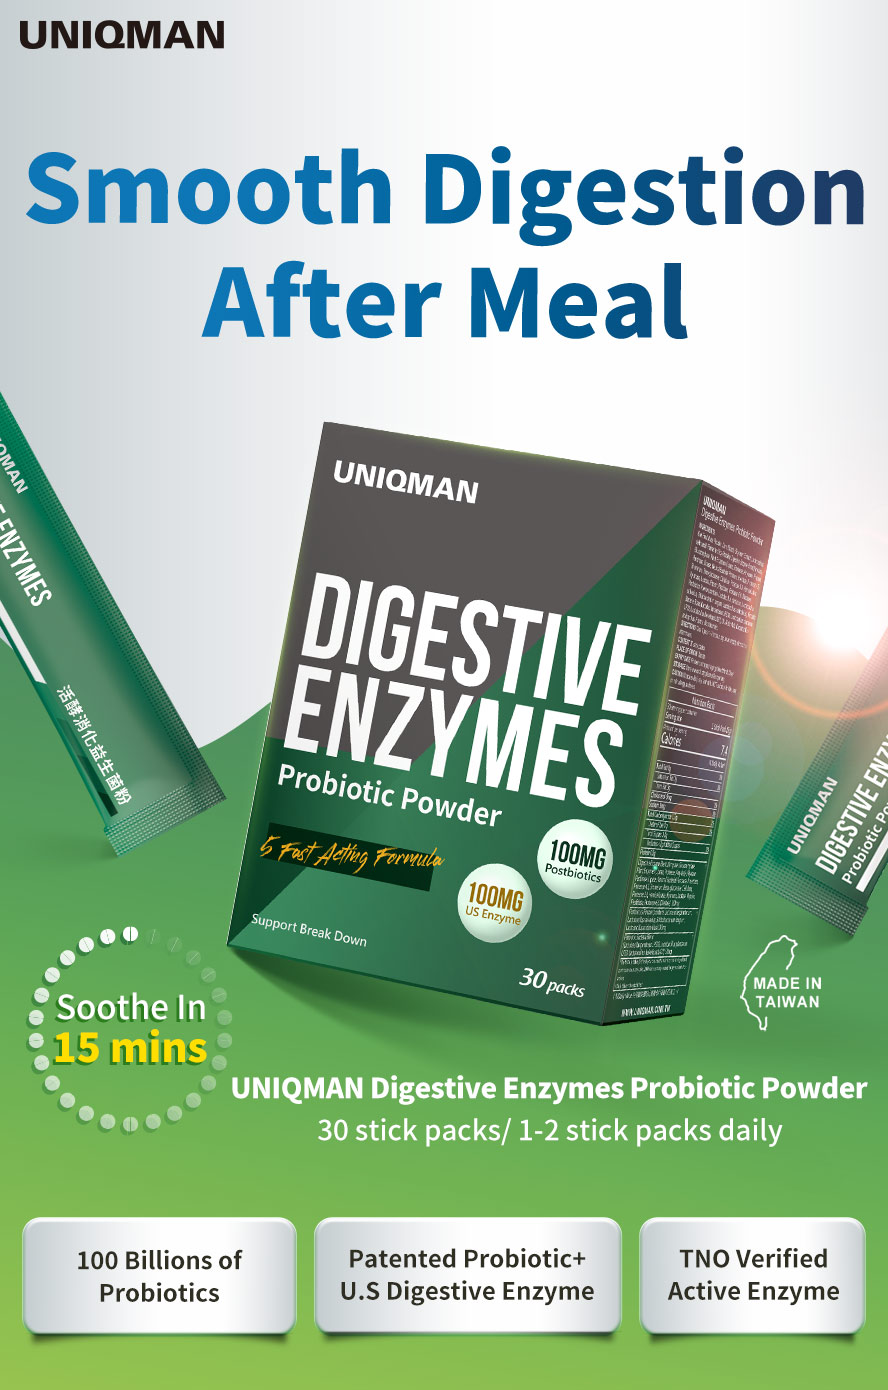 UNIQMAN Enzymes Probiotic has billions of probiotic to smooth digestion after meal & prevent bloating